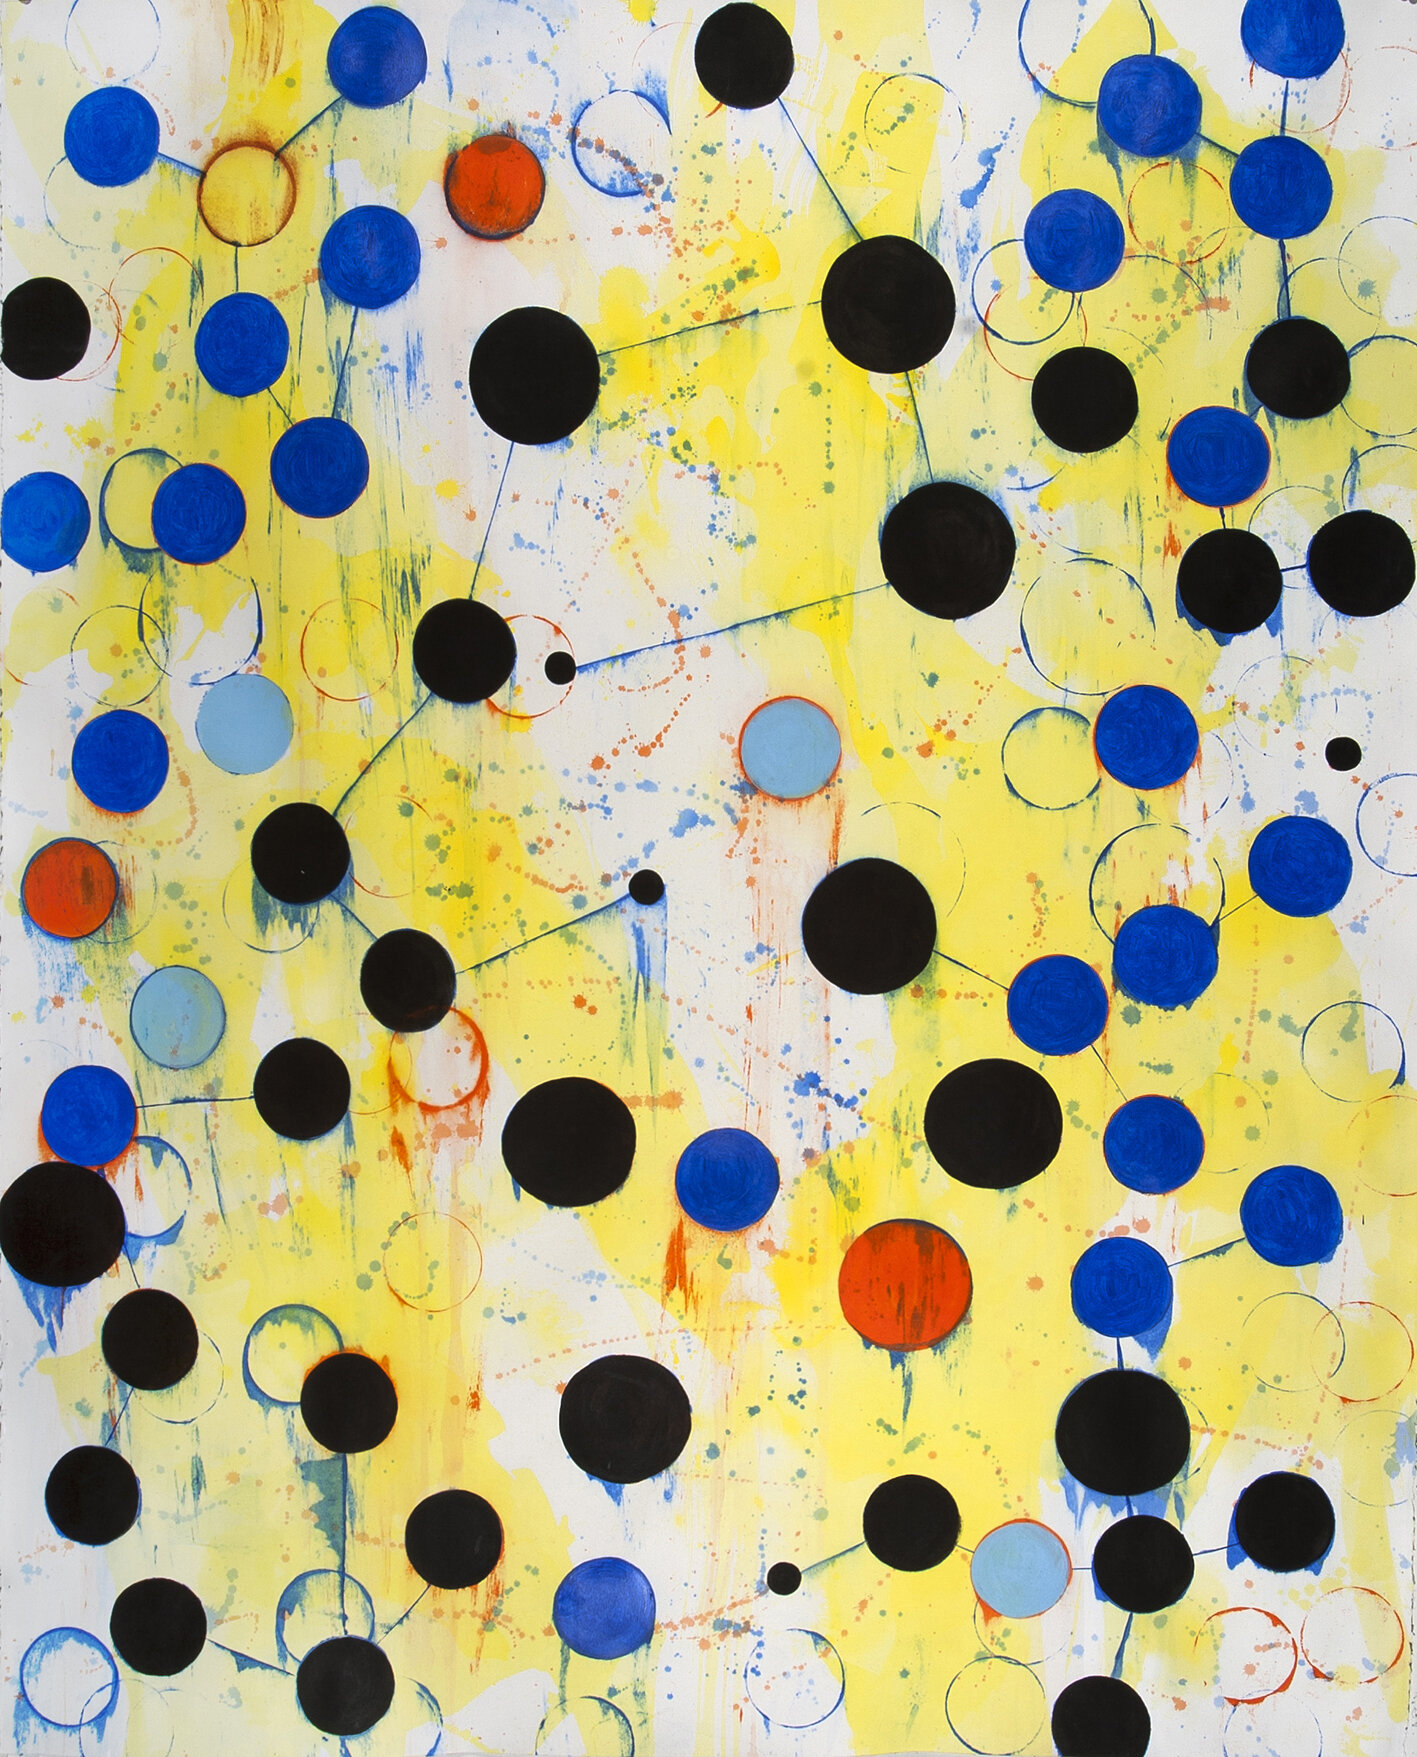   Dot Connection , 2012, acrylic on paper, 52 x 42 inches 